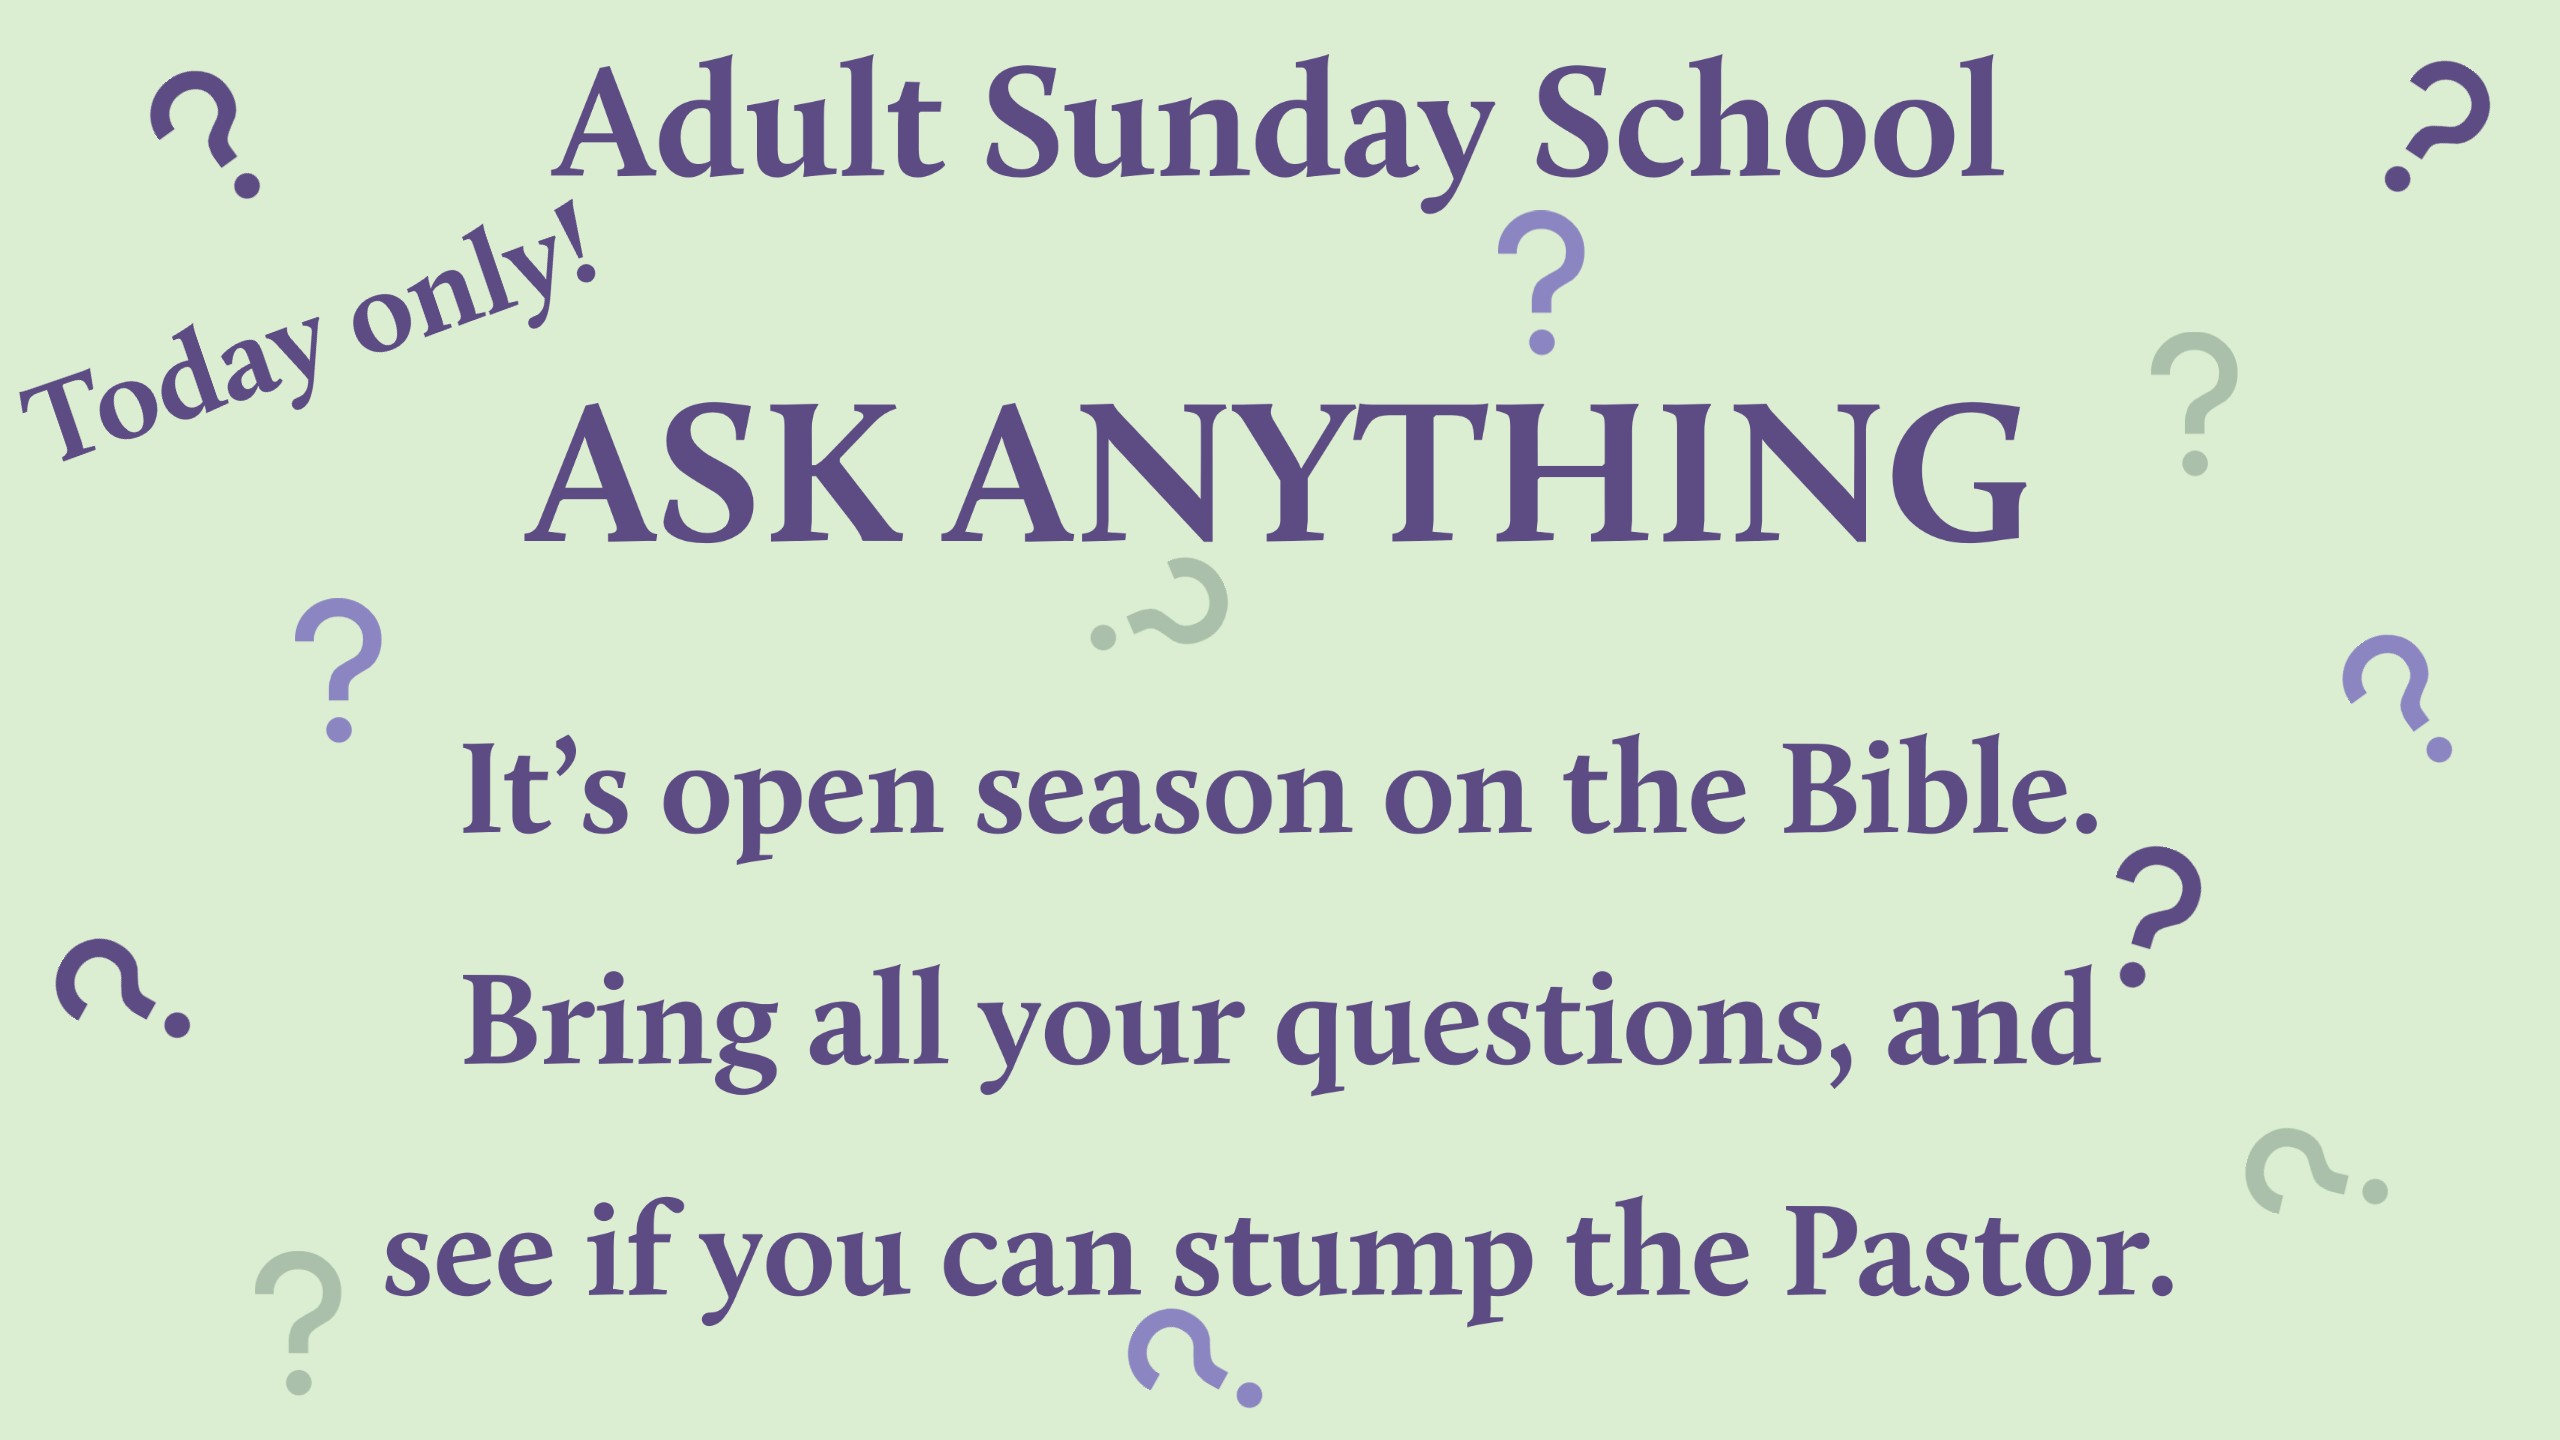 purple text on a green background reading "Adult Sunday School ASK ANYTHING tODAY ONLY! It’s open season on the Bible. Bring all your questions, and see if you can stump the Pastor." with green and purple icons of question marks at odd angles